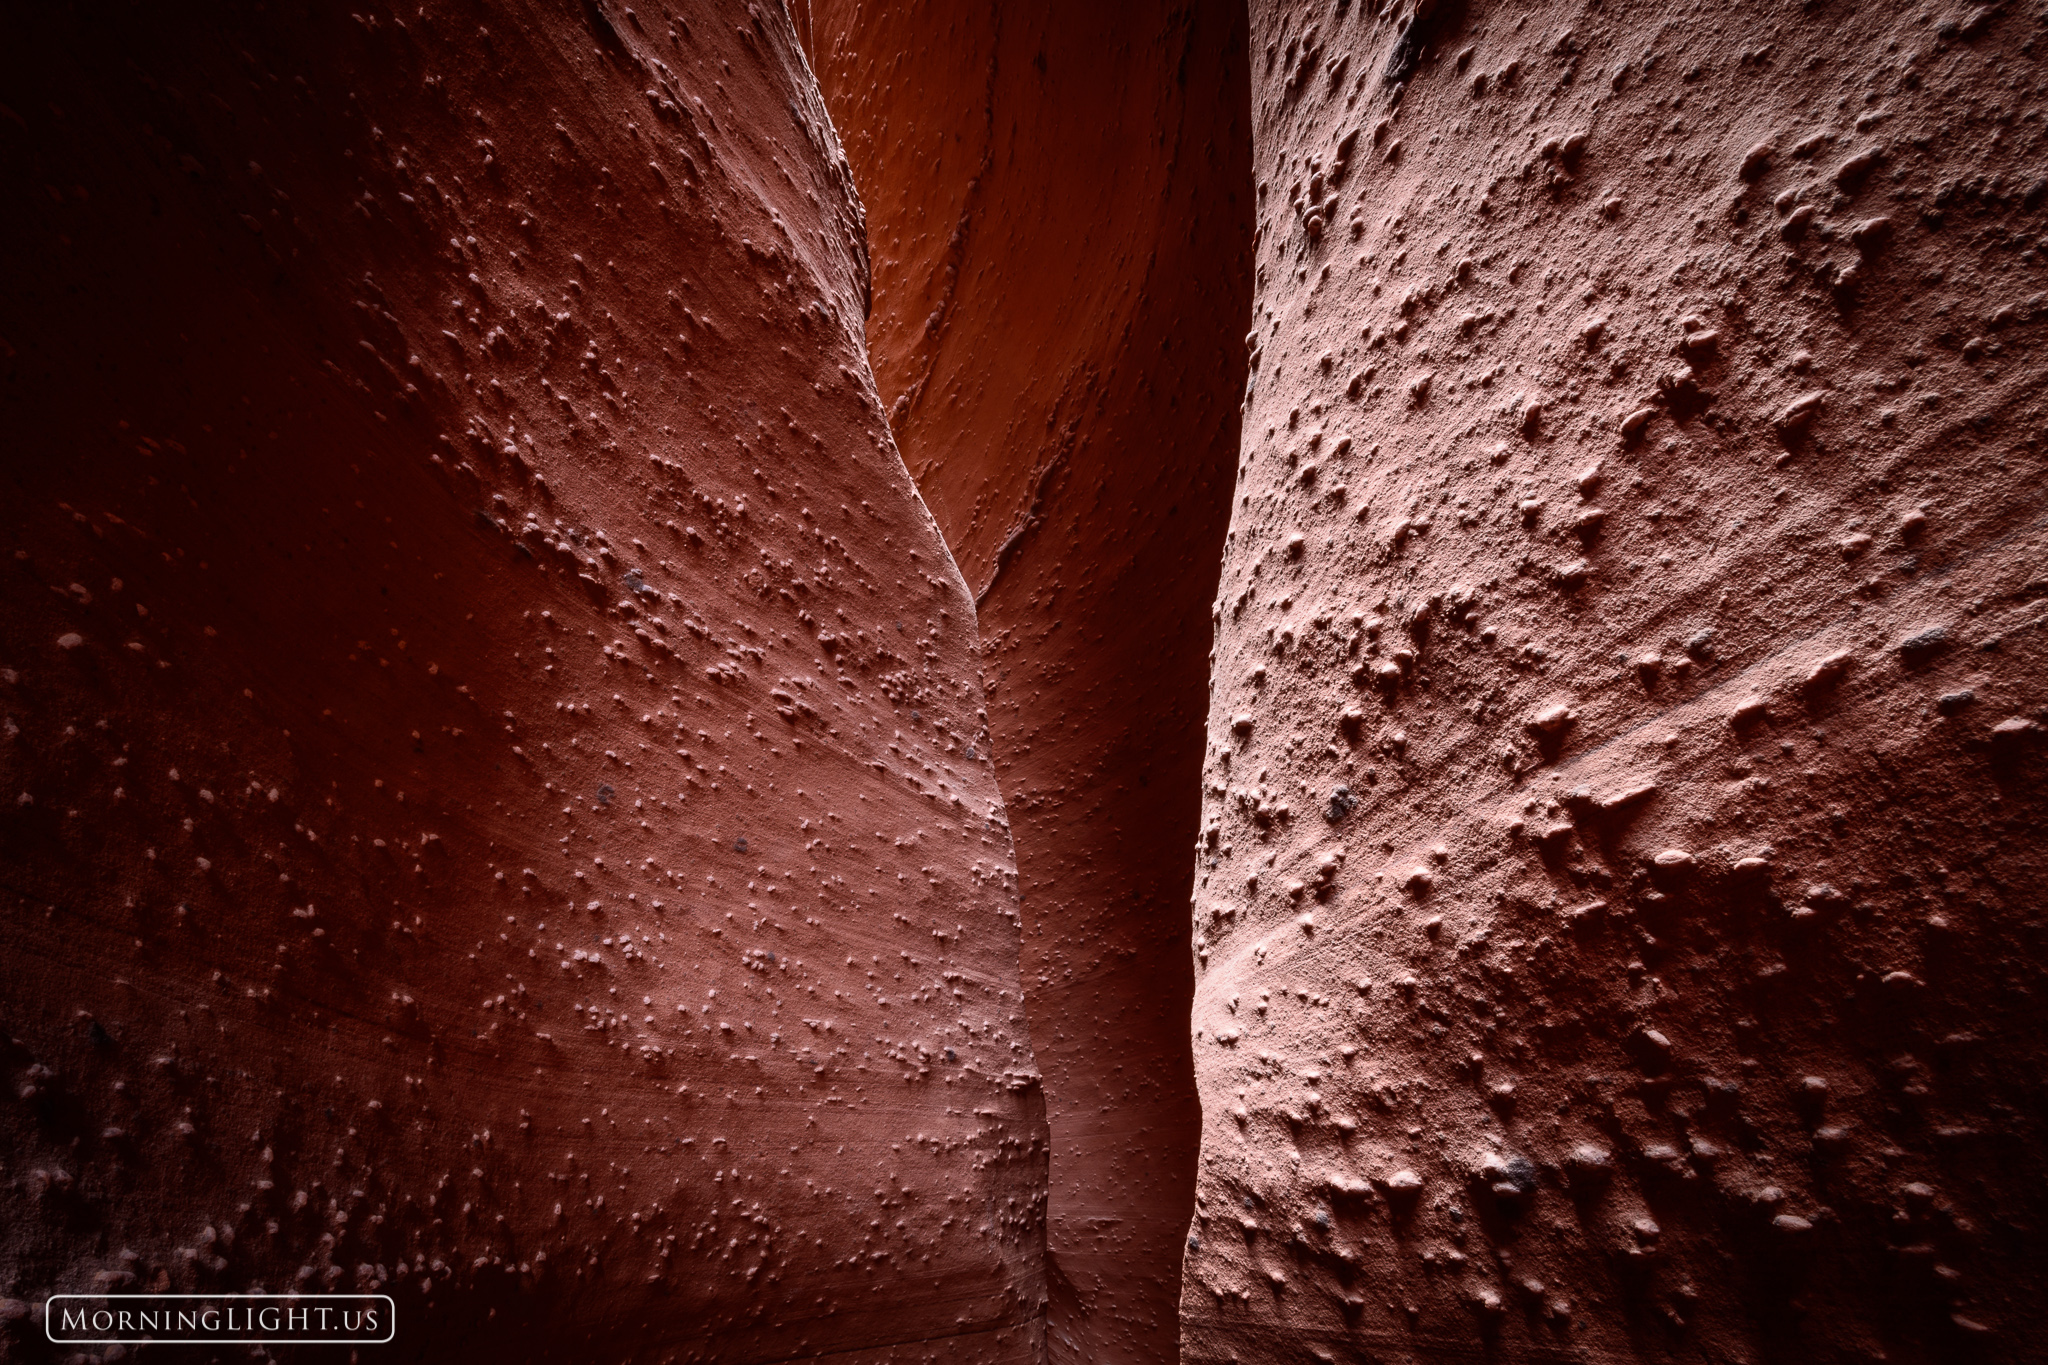 This is a very narrow slot canyon in central Utah. There is barely 12" between walls in many places such as this, making it difficult...